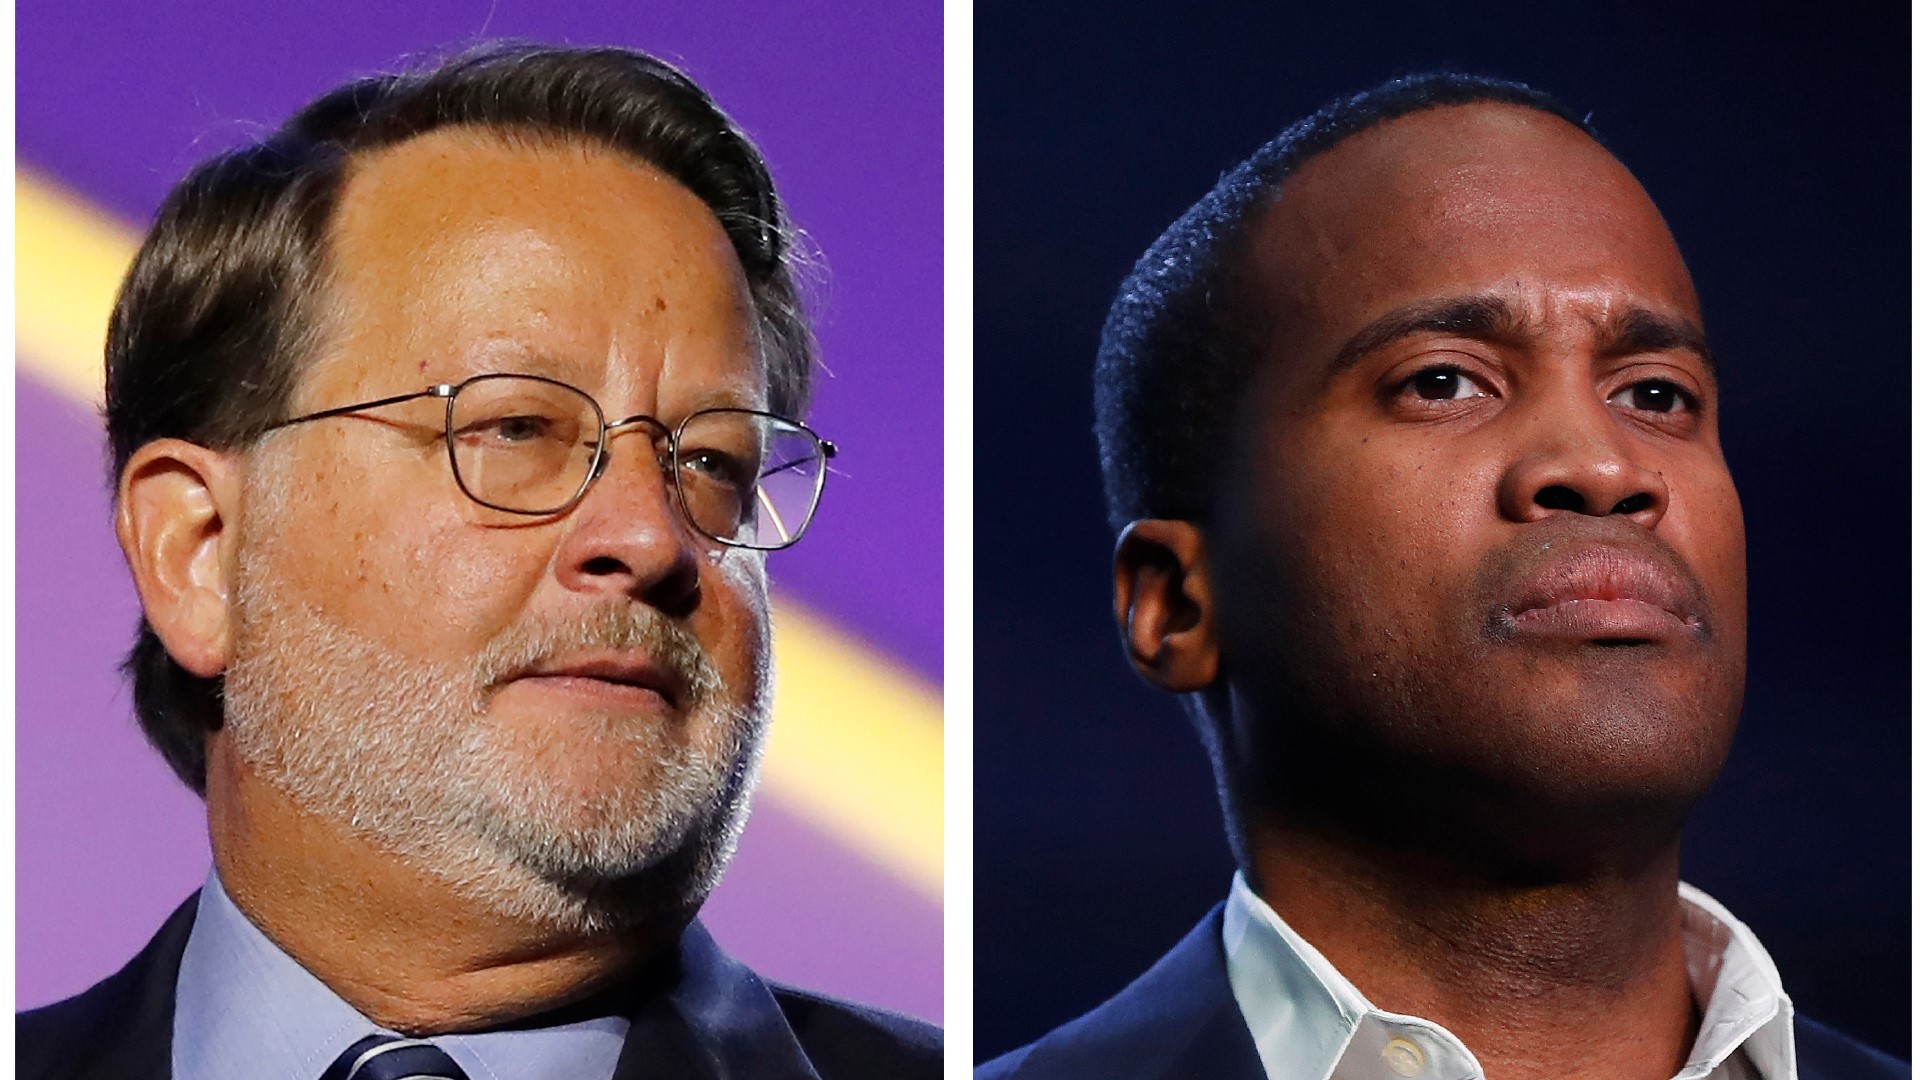 Michigan’s Senate race between incumbent Democrat Gary Peters and Republican challenger John James was too early to call Wednesday morning.